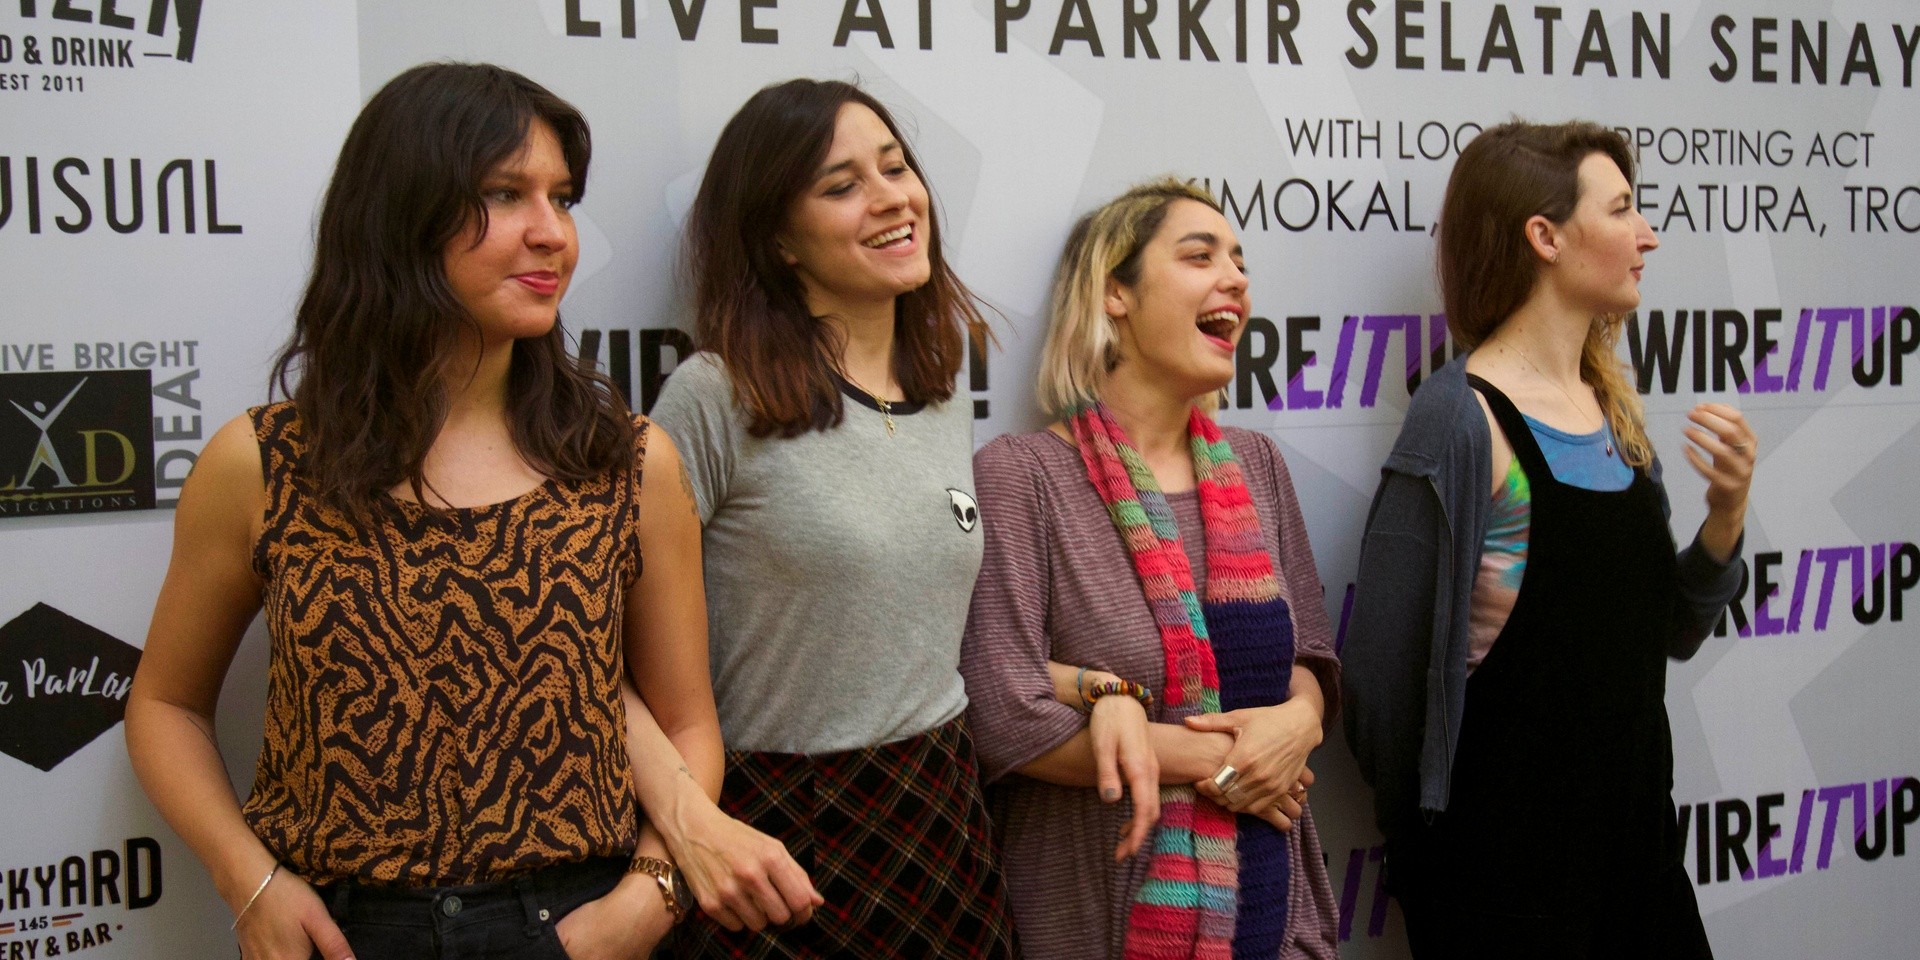 Warpaint, on growing up with music and eventually making some of it